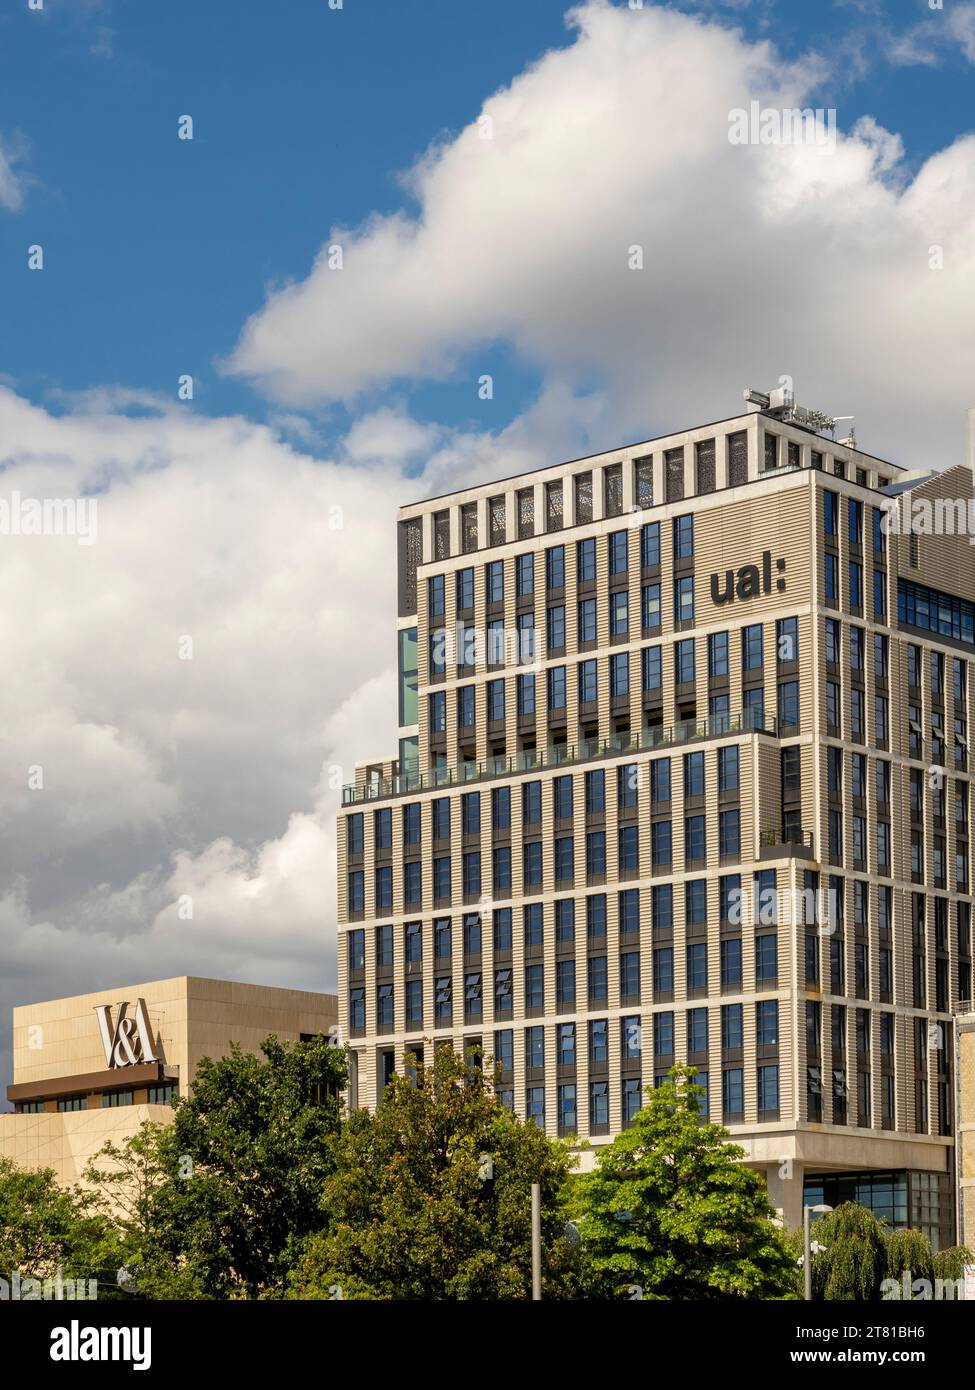 UAL: London College of Fashion situated next to V&A East in the Olympic Park, Stratford, London, UK. Stock Photo